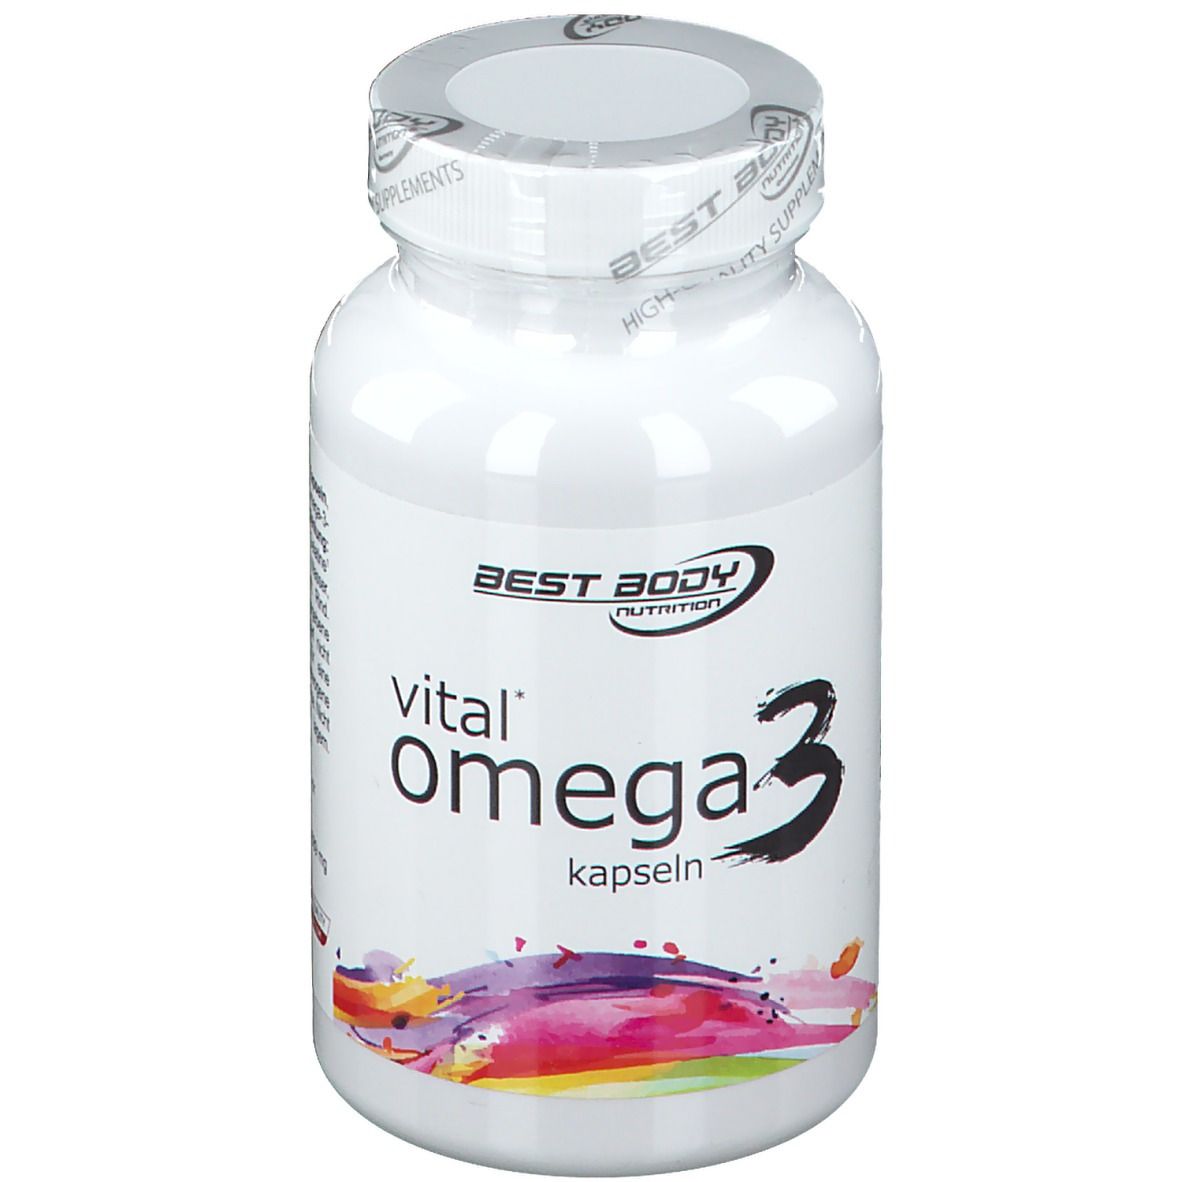 Best Body Nutrition Future Omega 3